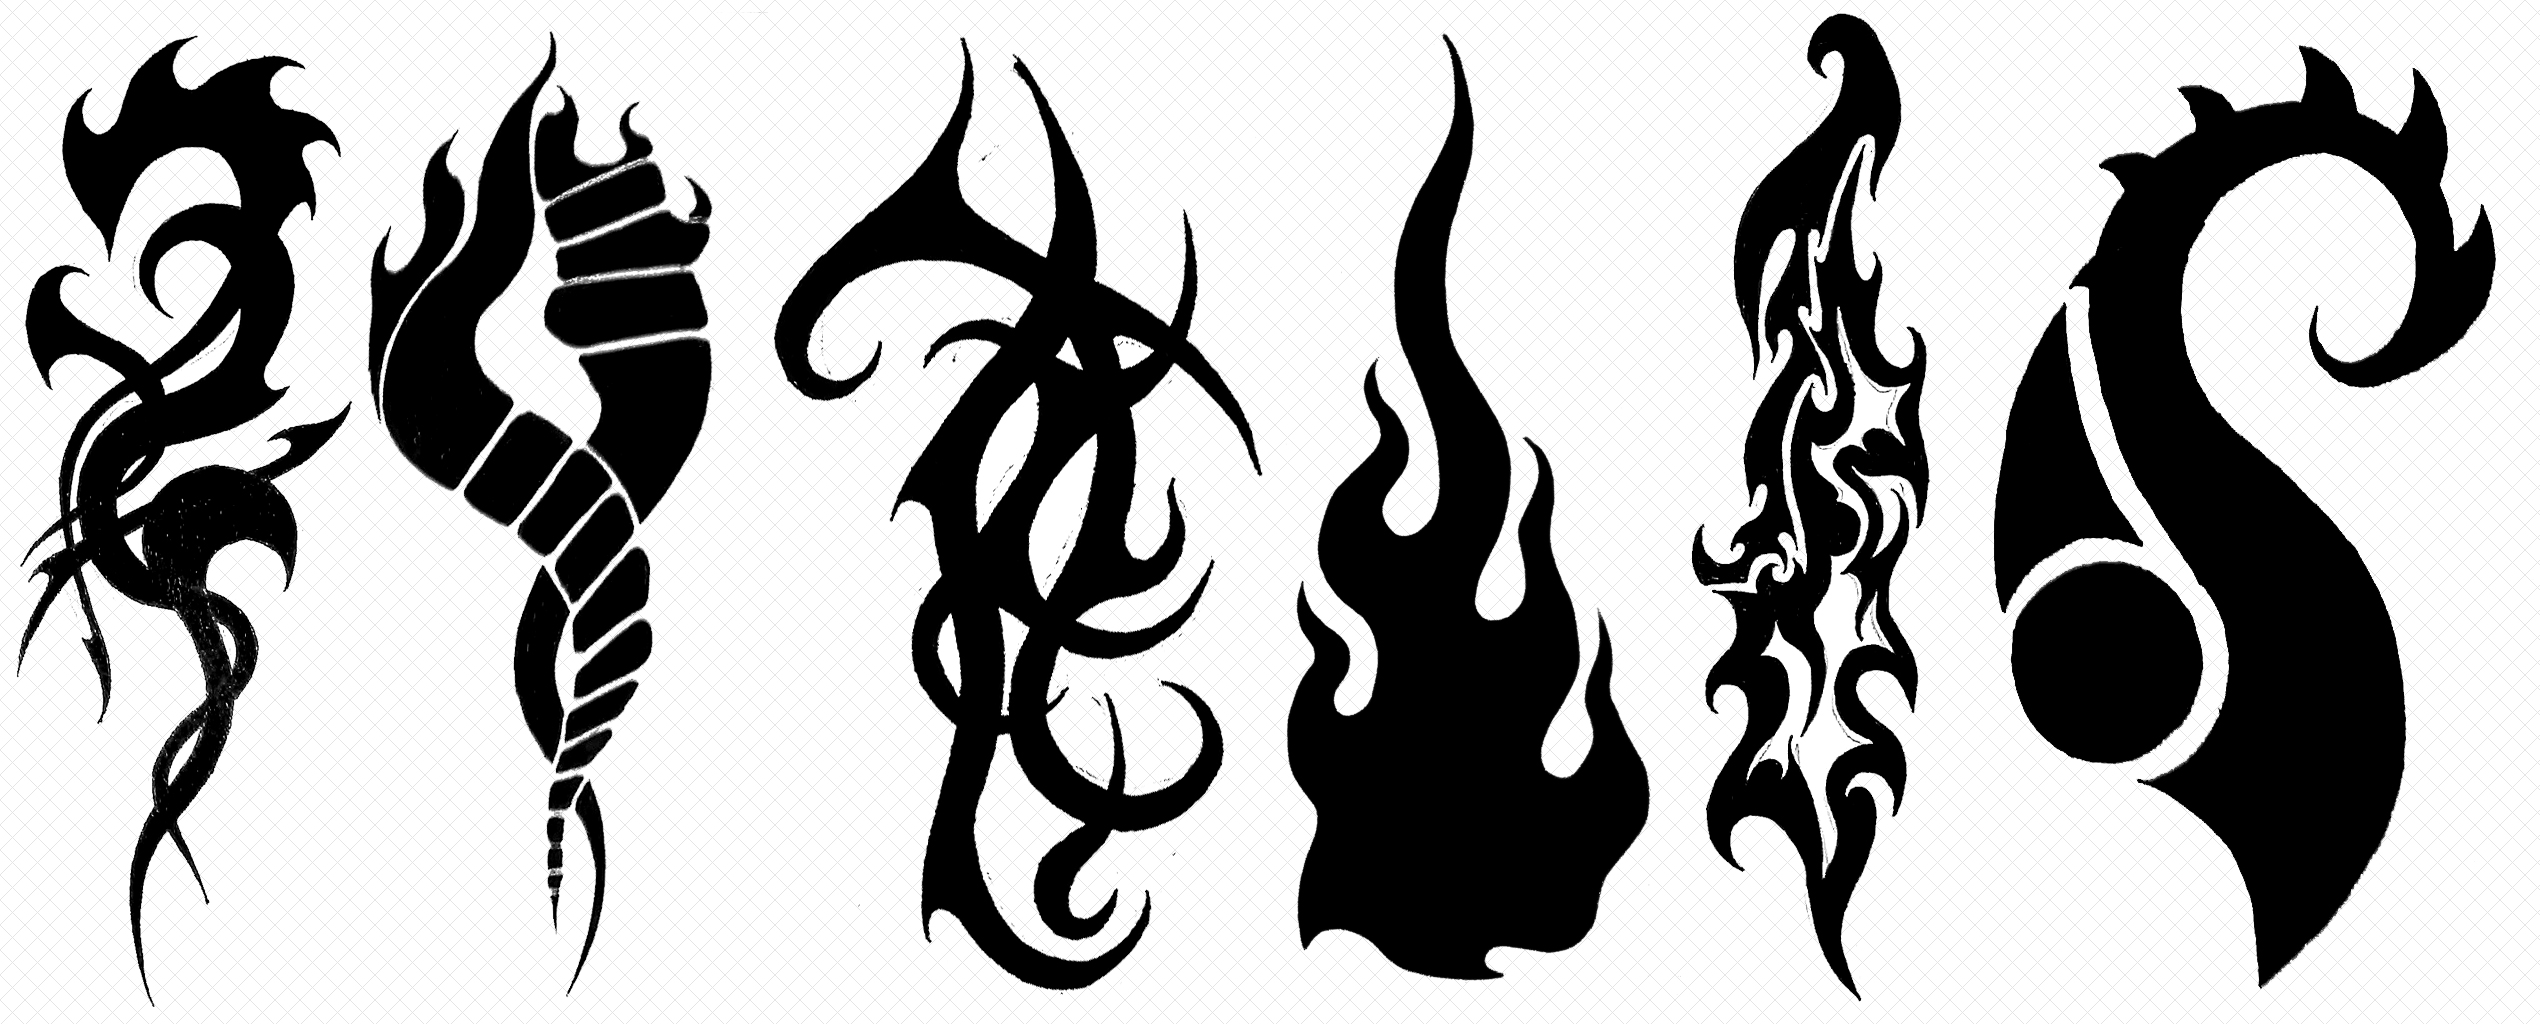 Tattoos III - Black Abstract by Eel-Ecurb on Clipart library